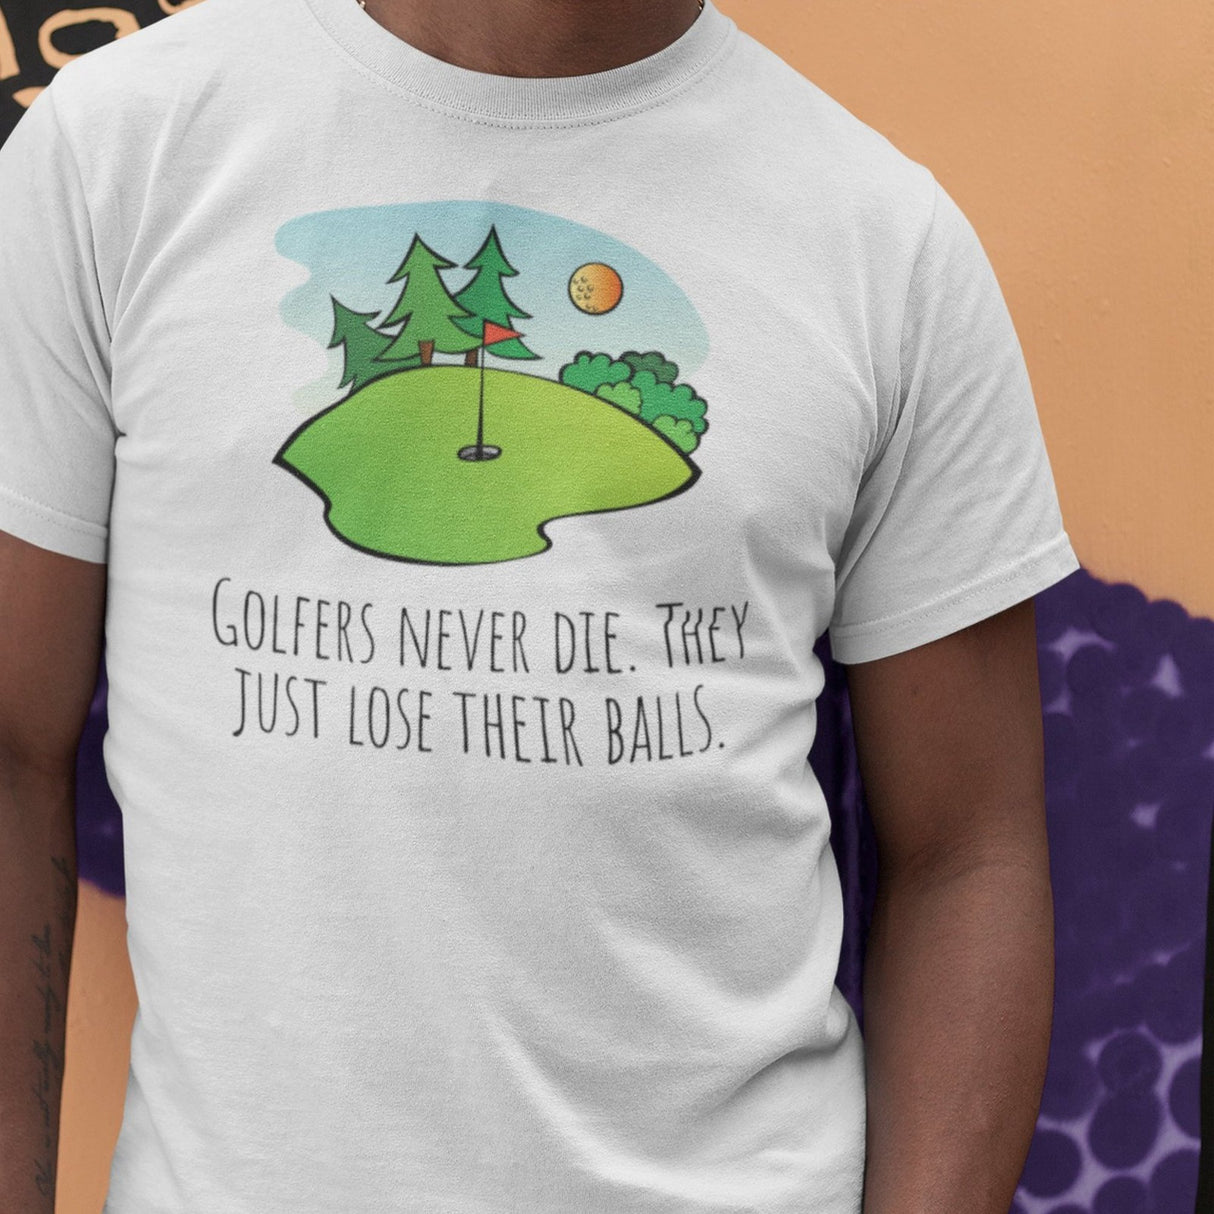 golfers-never-die-they-just-lose-their-balls-golf-tee-golfer-t-shirt-golfing-tee-funny-t-shirt-crude-tee#color_white